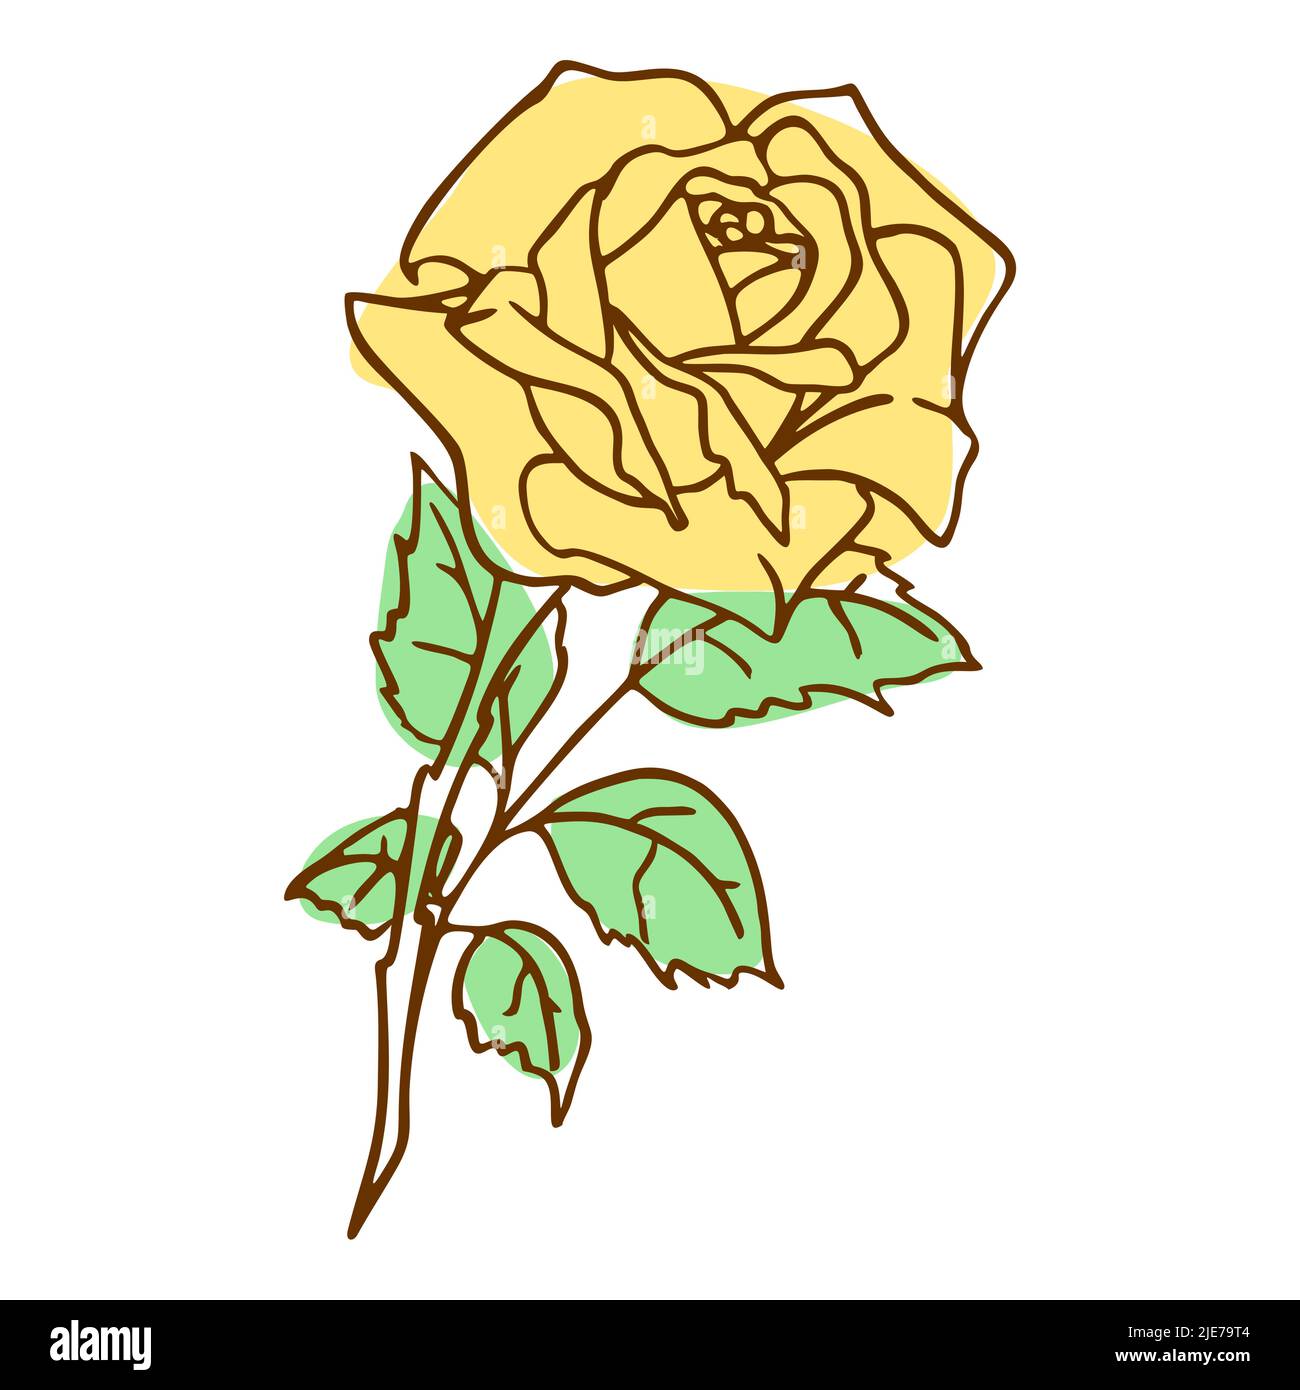 contour image of a yellow rose on a white background, drawing, color graphics, design Stock Vector